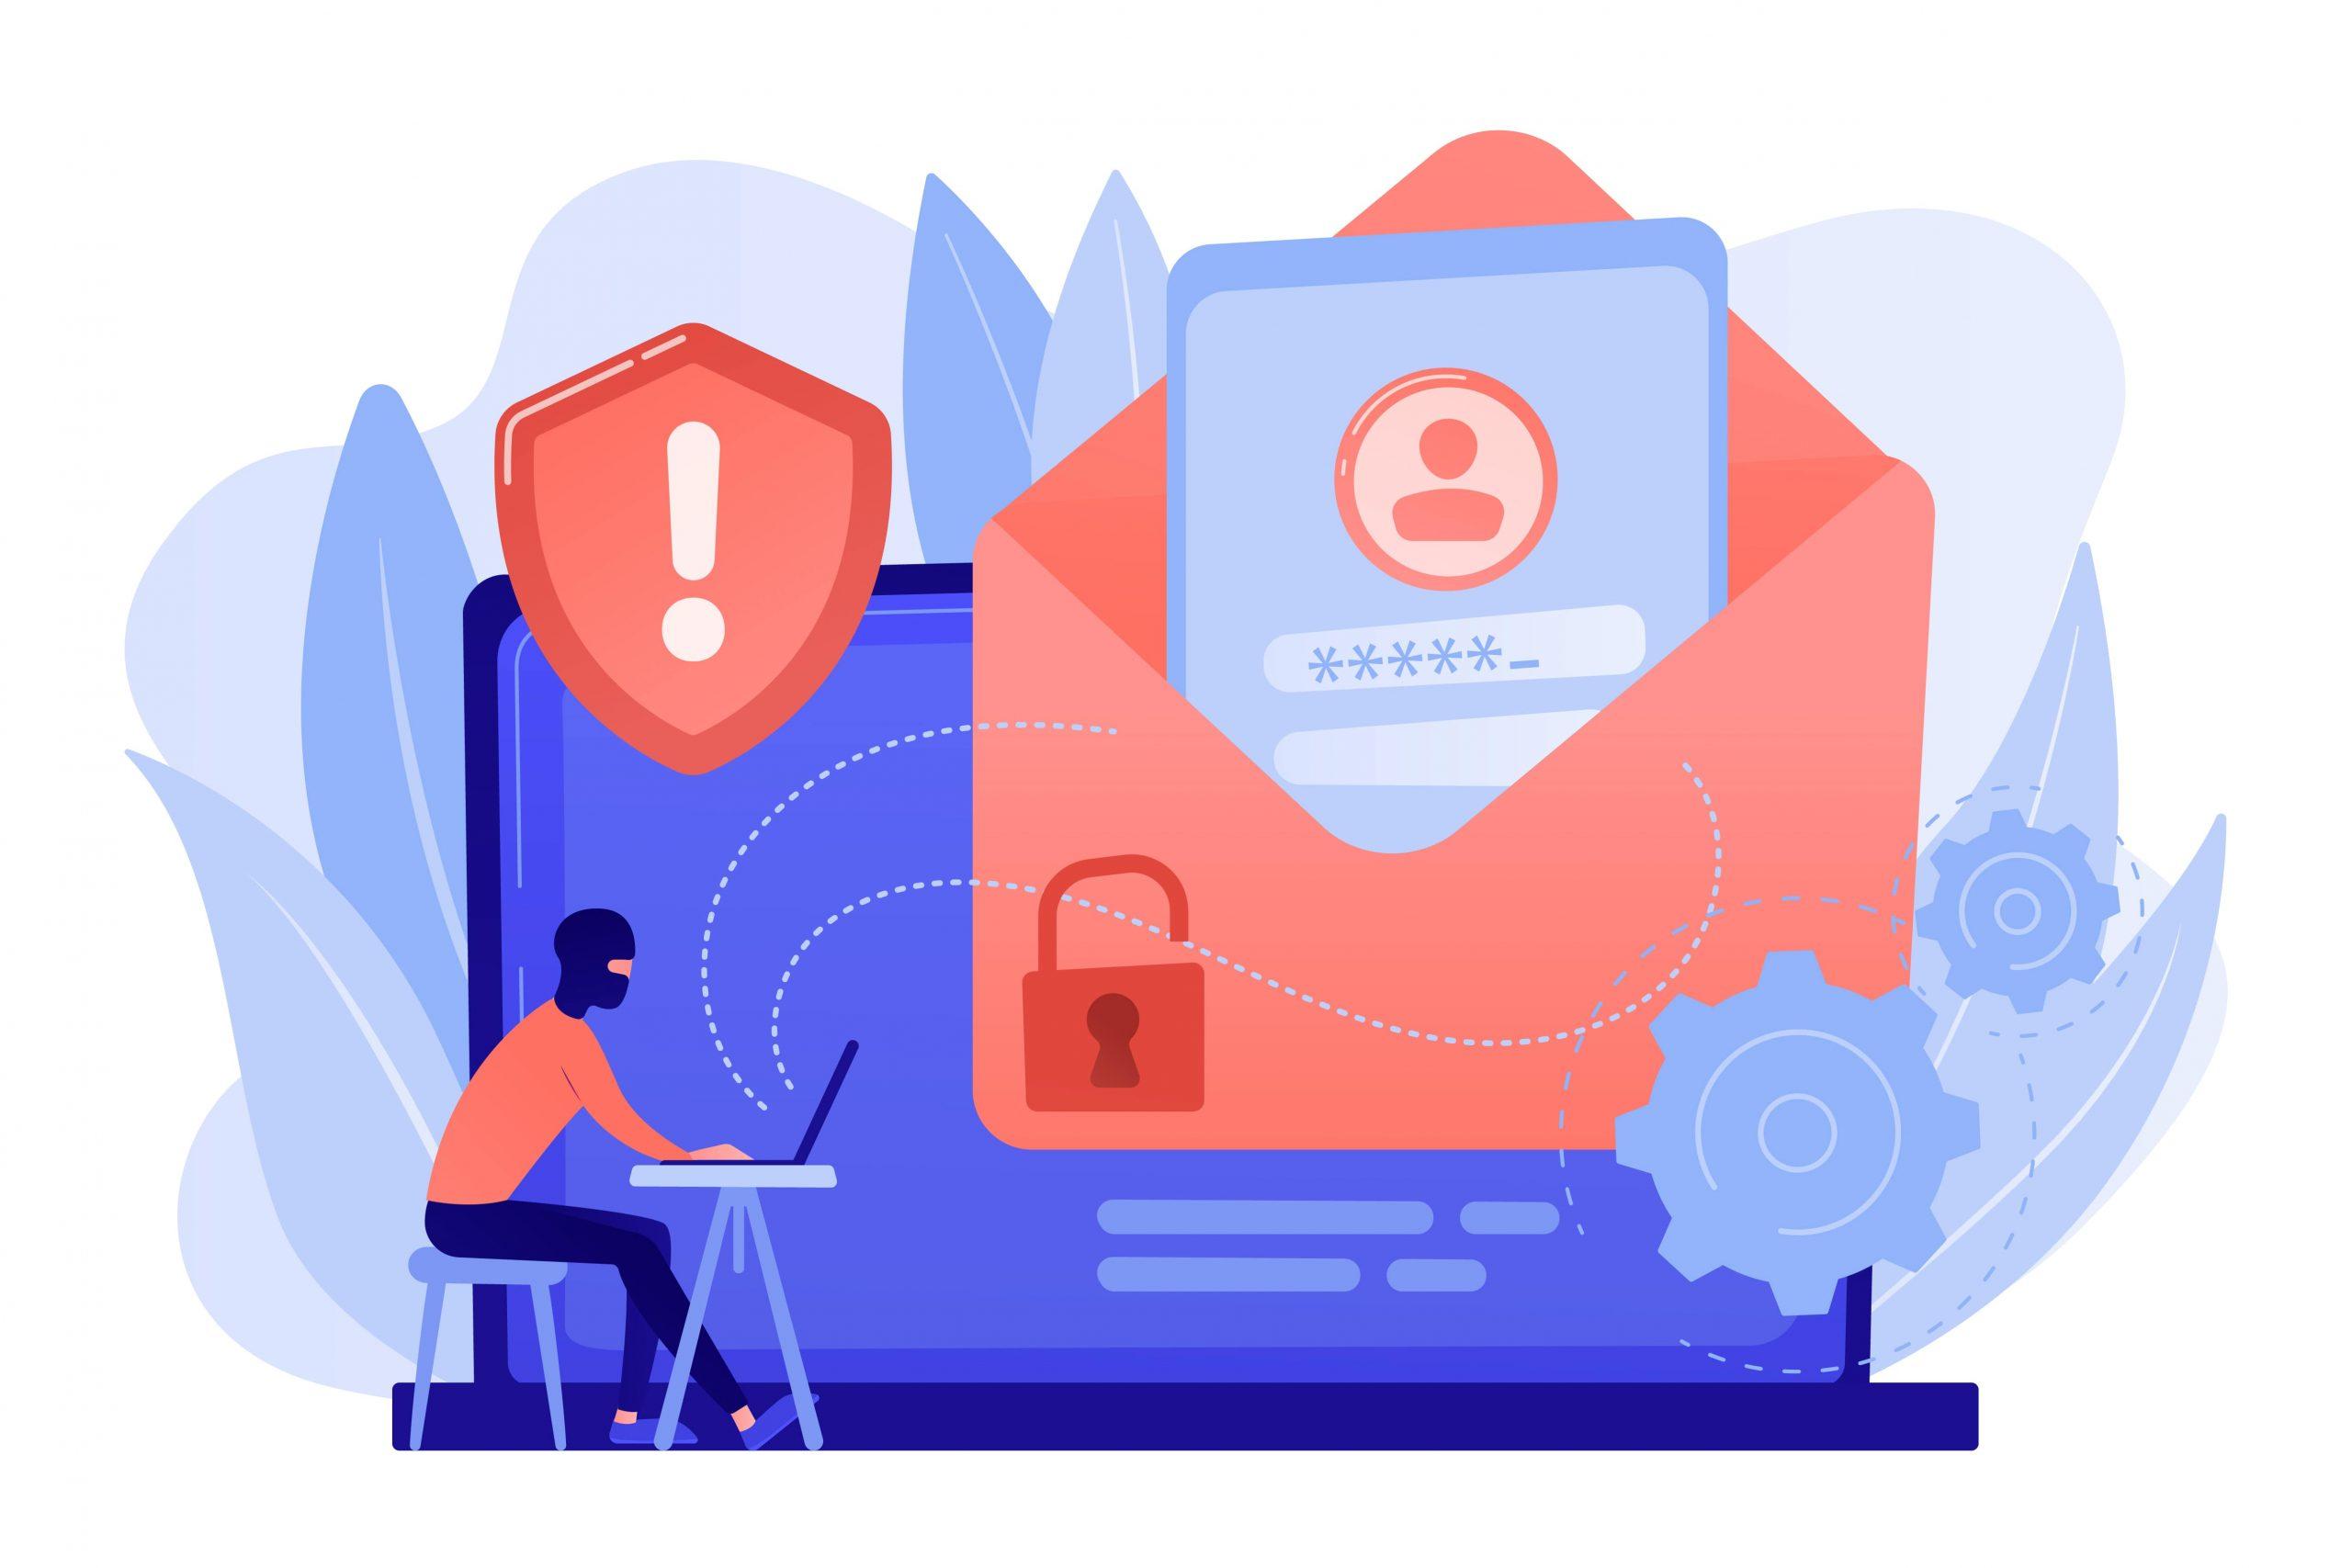 How To Improve Email Security And Privacy?